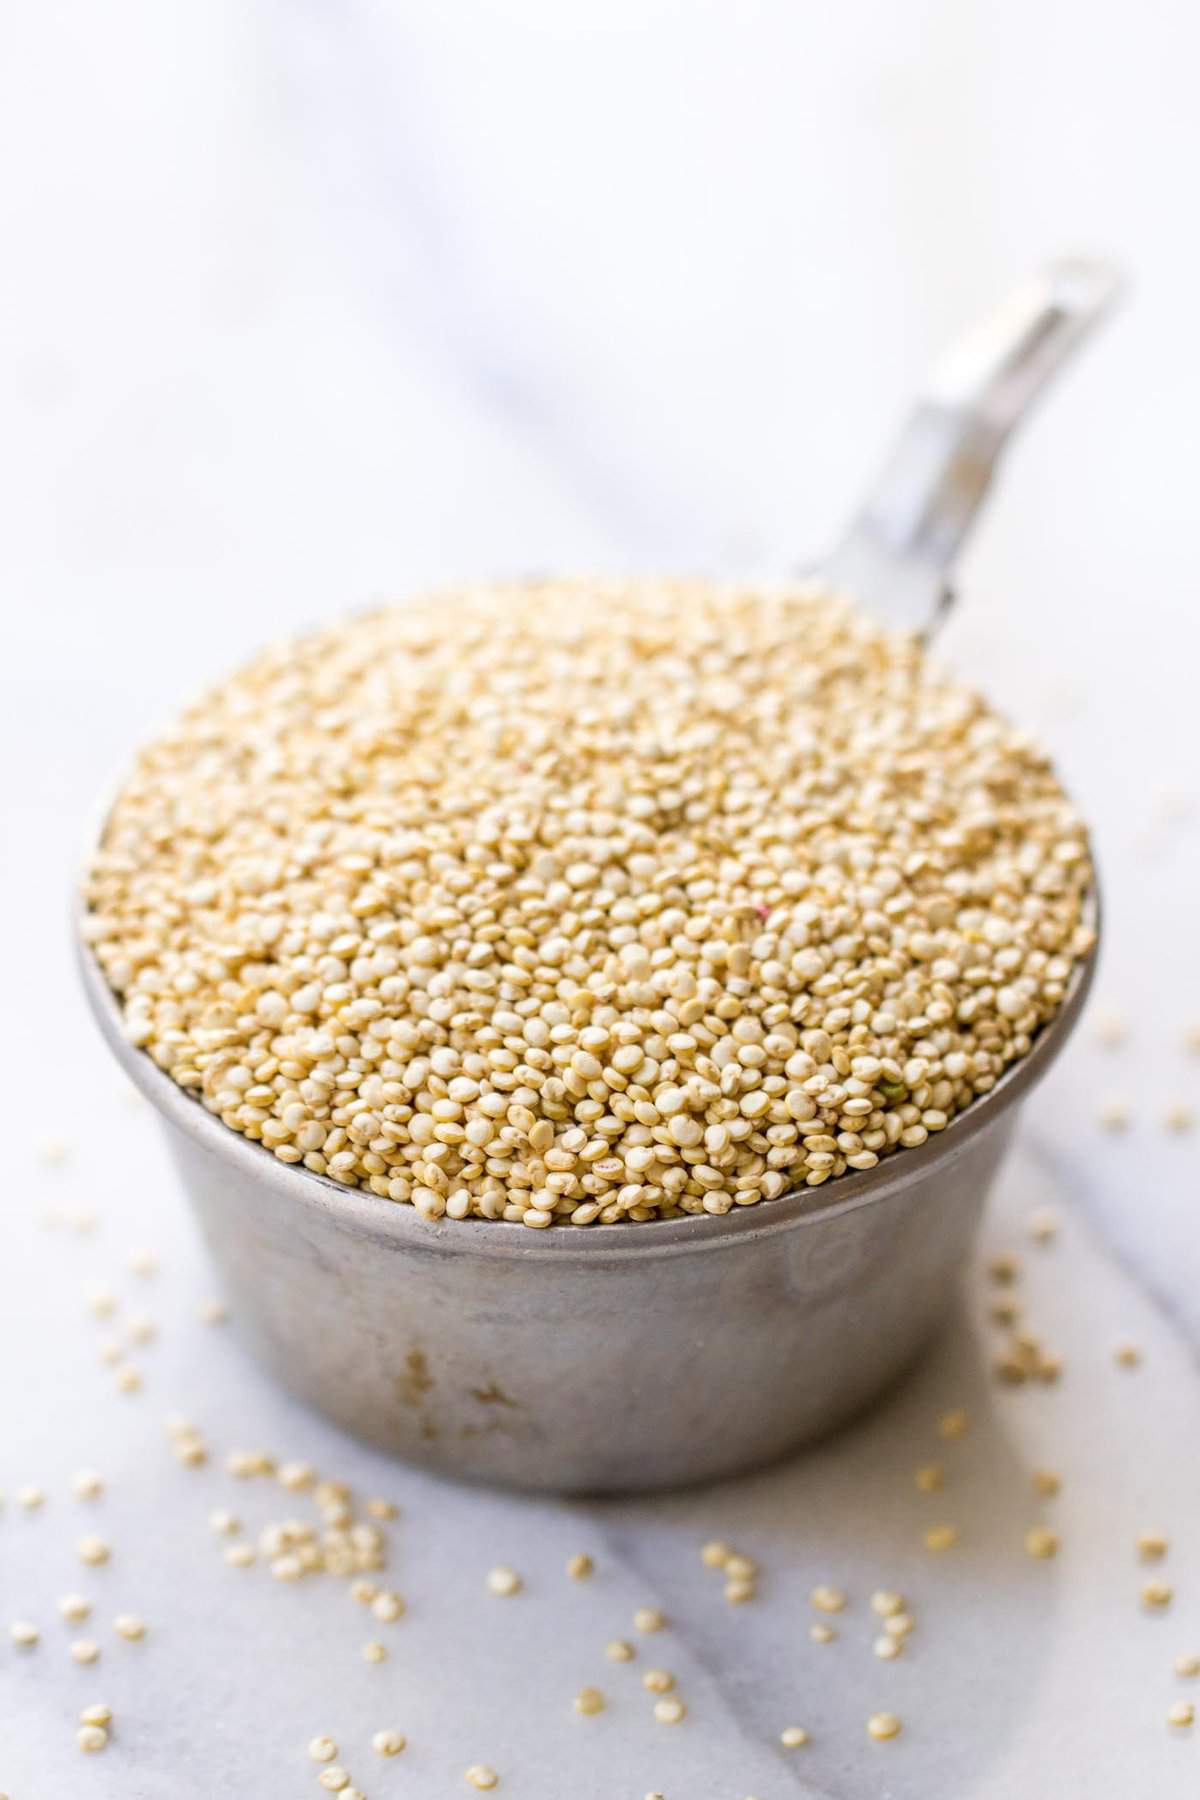 Nutrition Facts of Quinoa